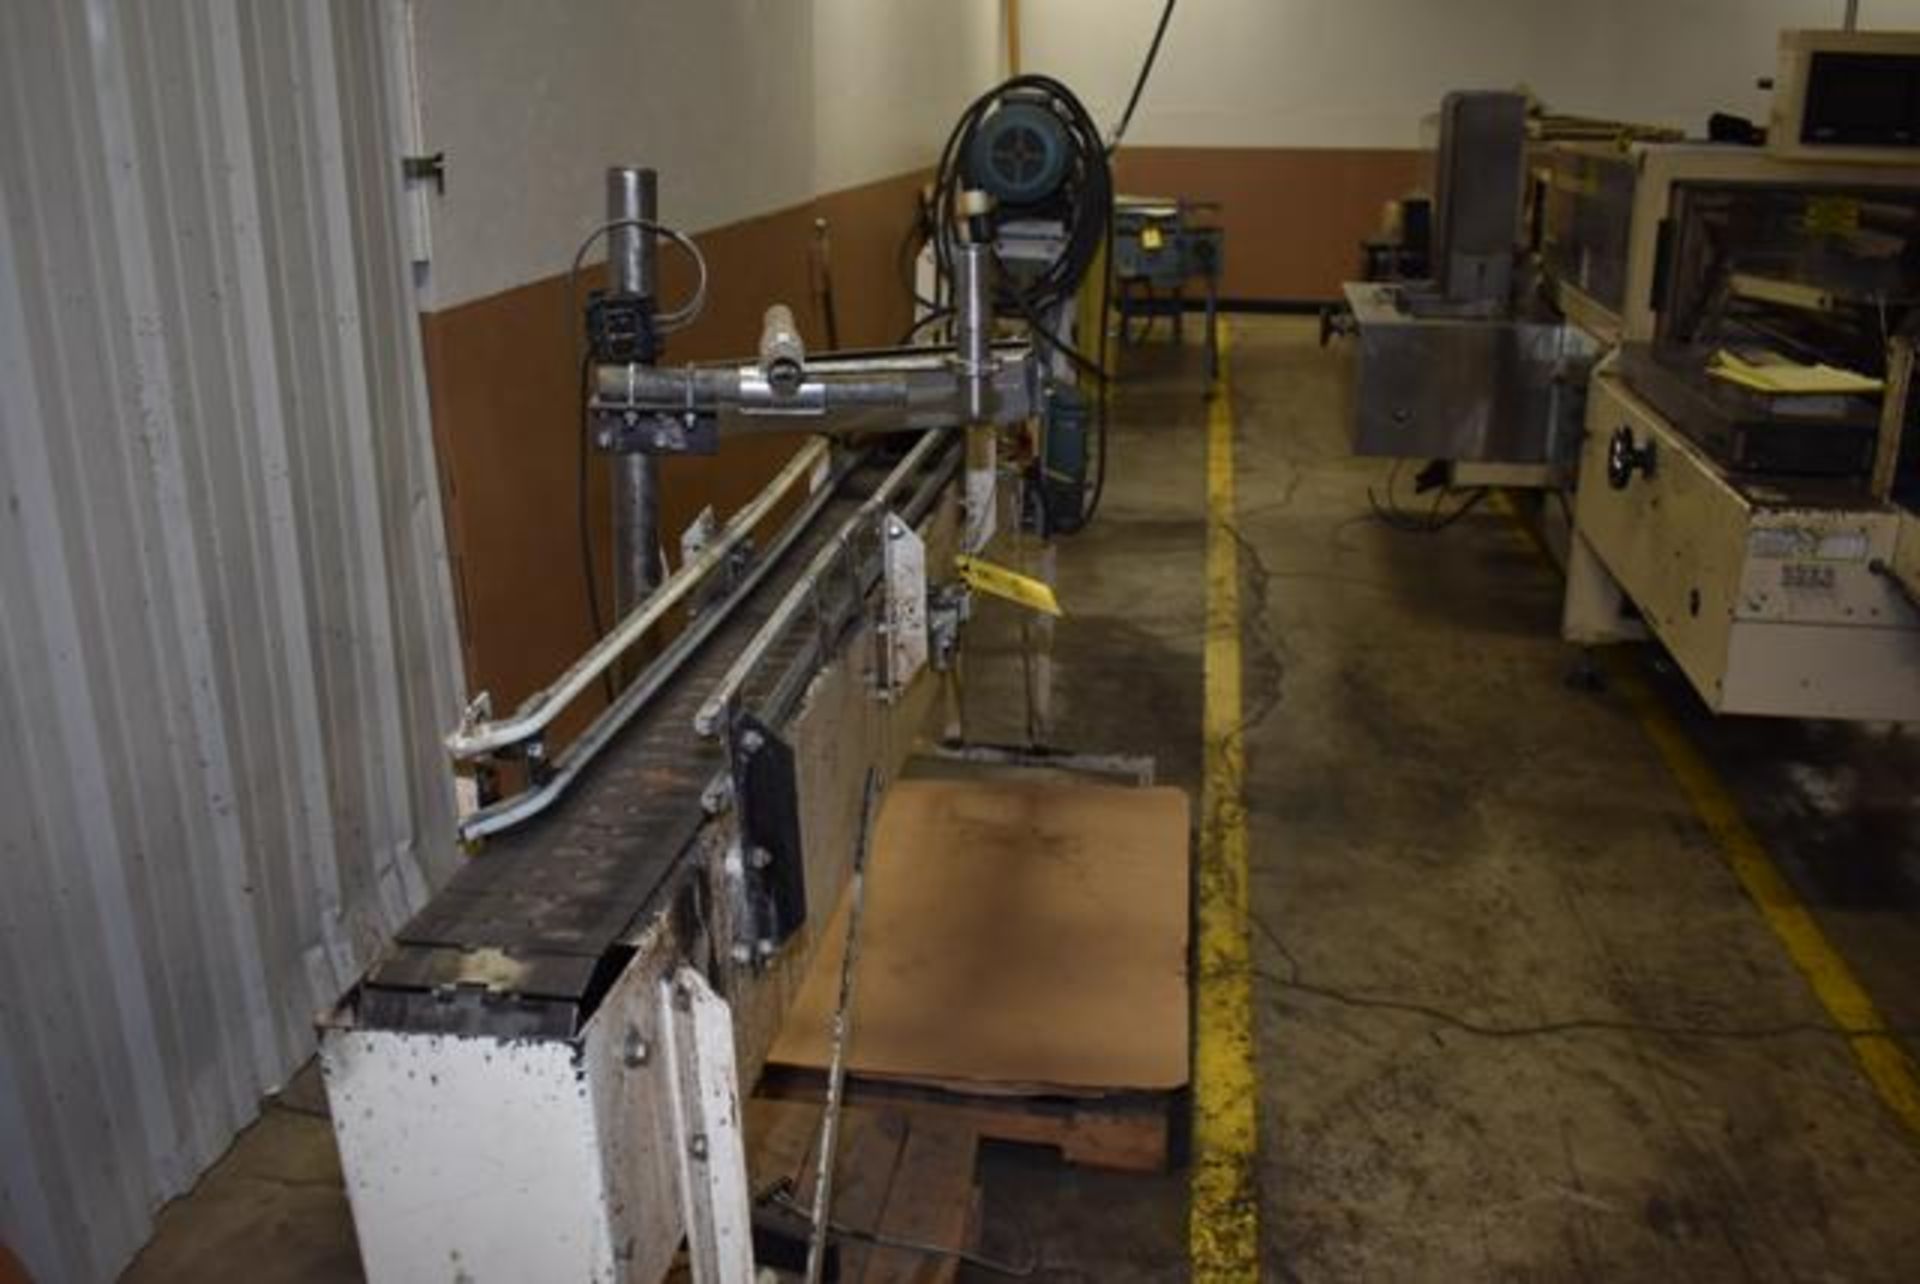 ( Late Delivery Item Expected Availability Mid May) Motorized Steel Belt Conveyor, 9' Length x 4" Wi - Image 2 of 3